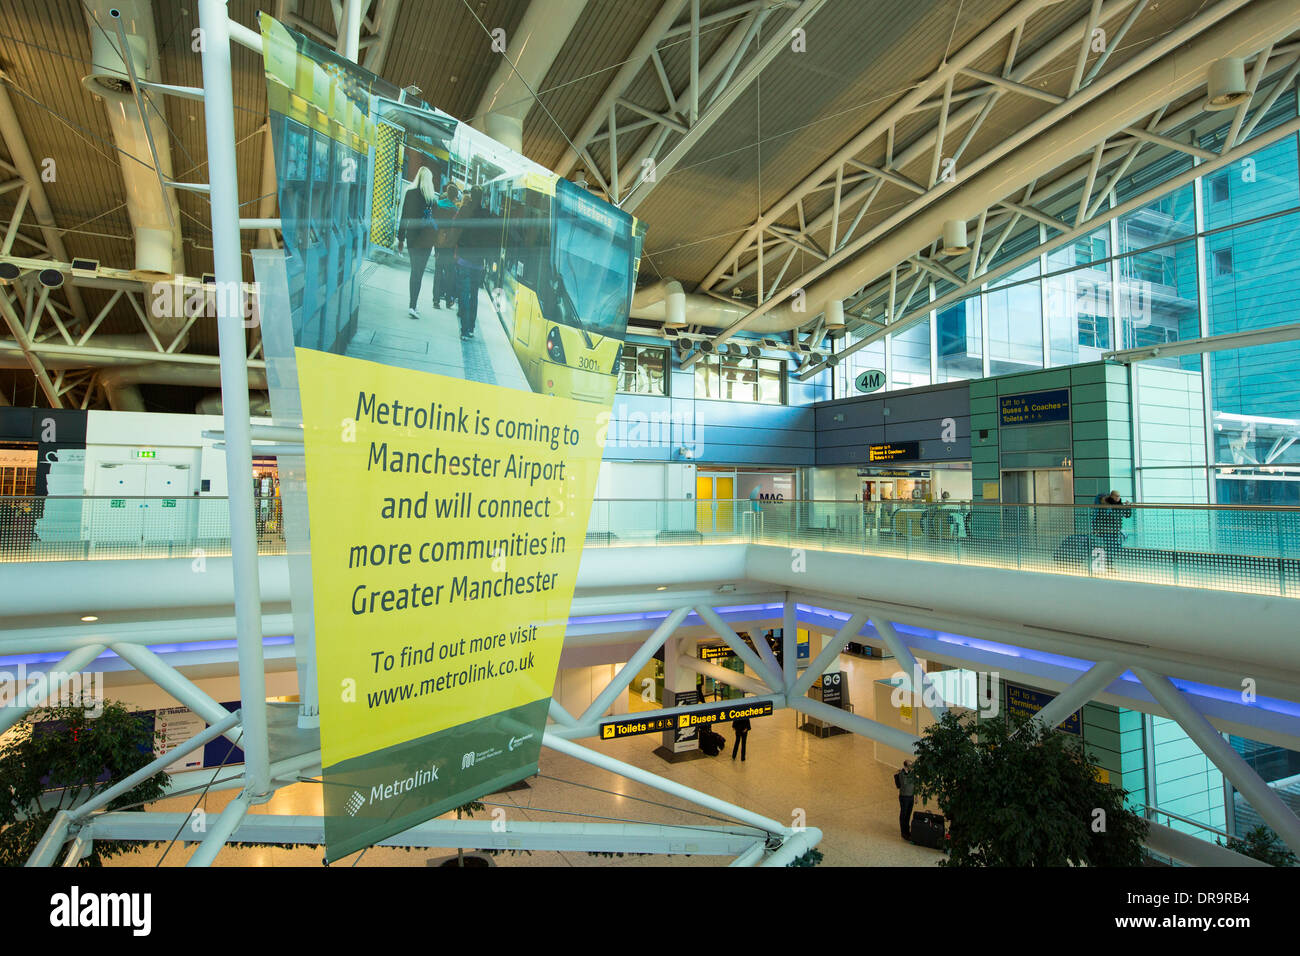 An advert for the extension of the Metrolink tram system at Manchester Airport train station, UK. Stock Photo